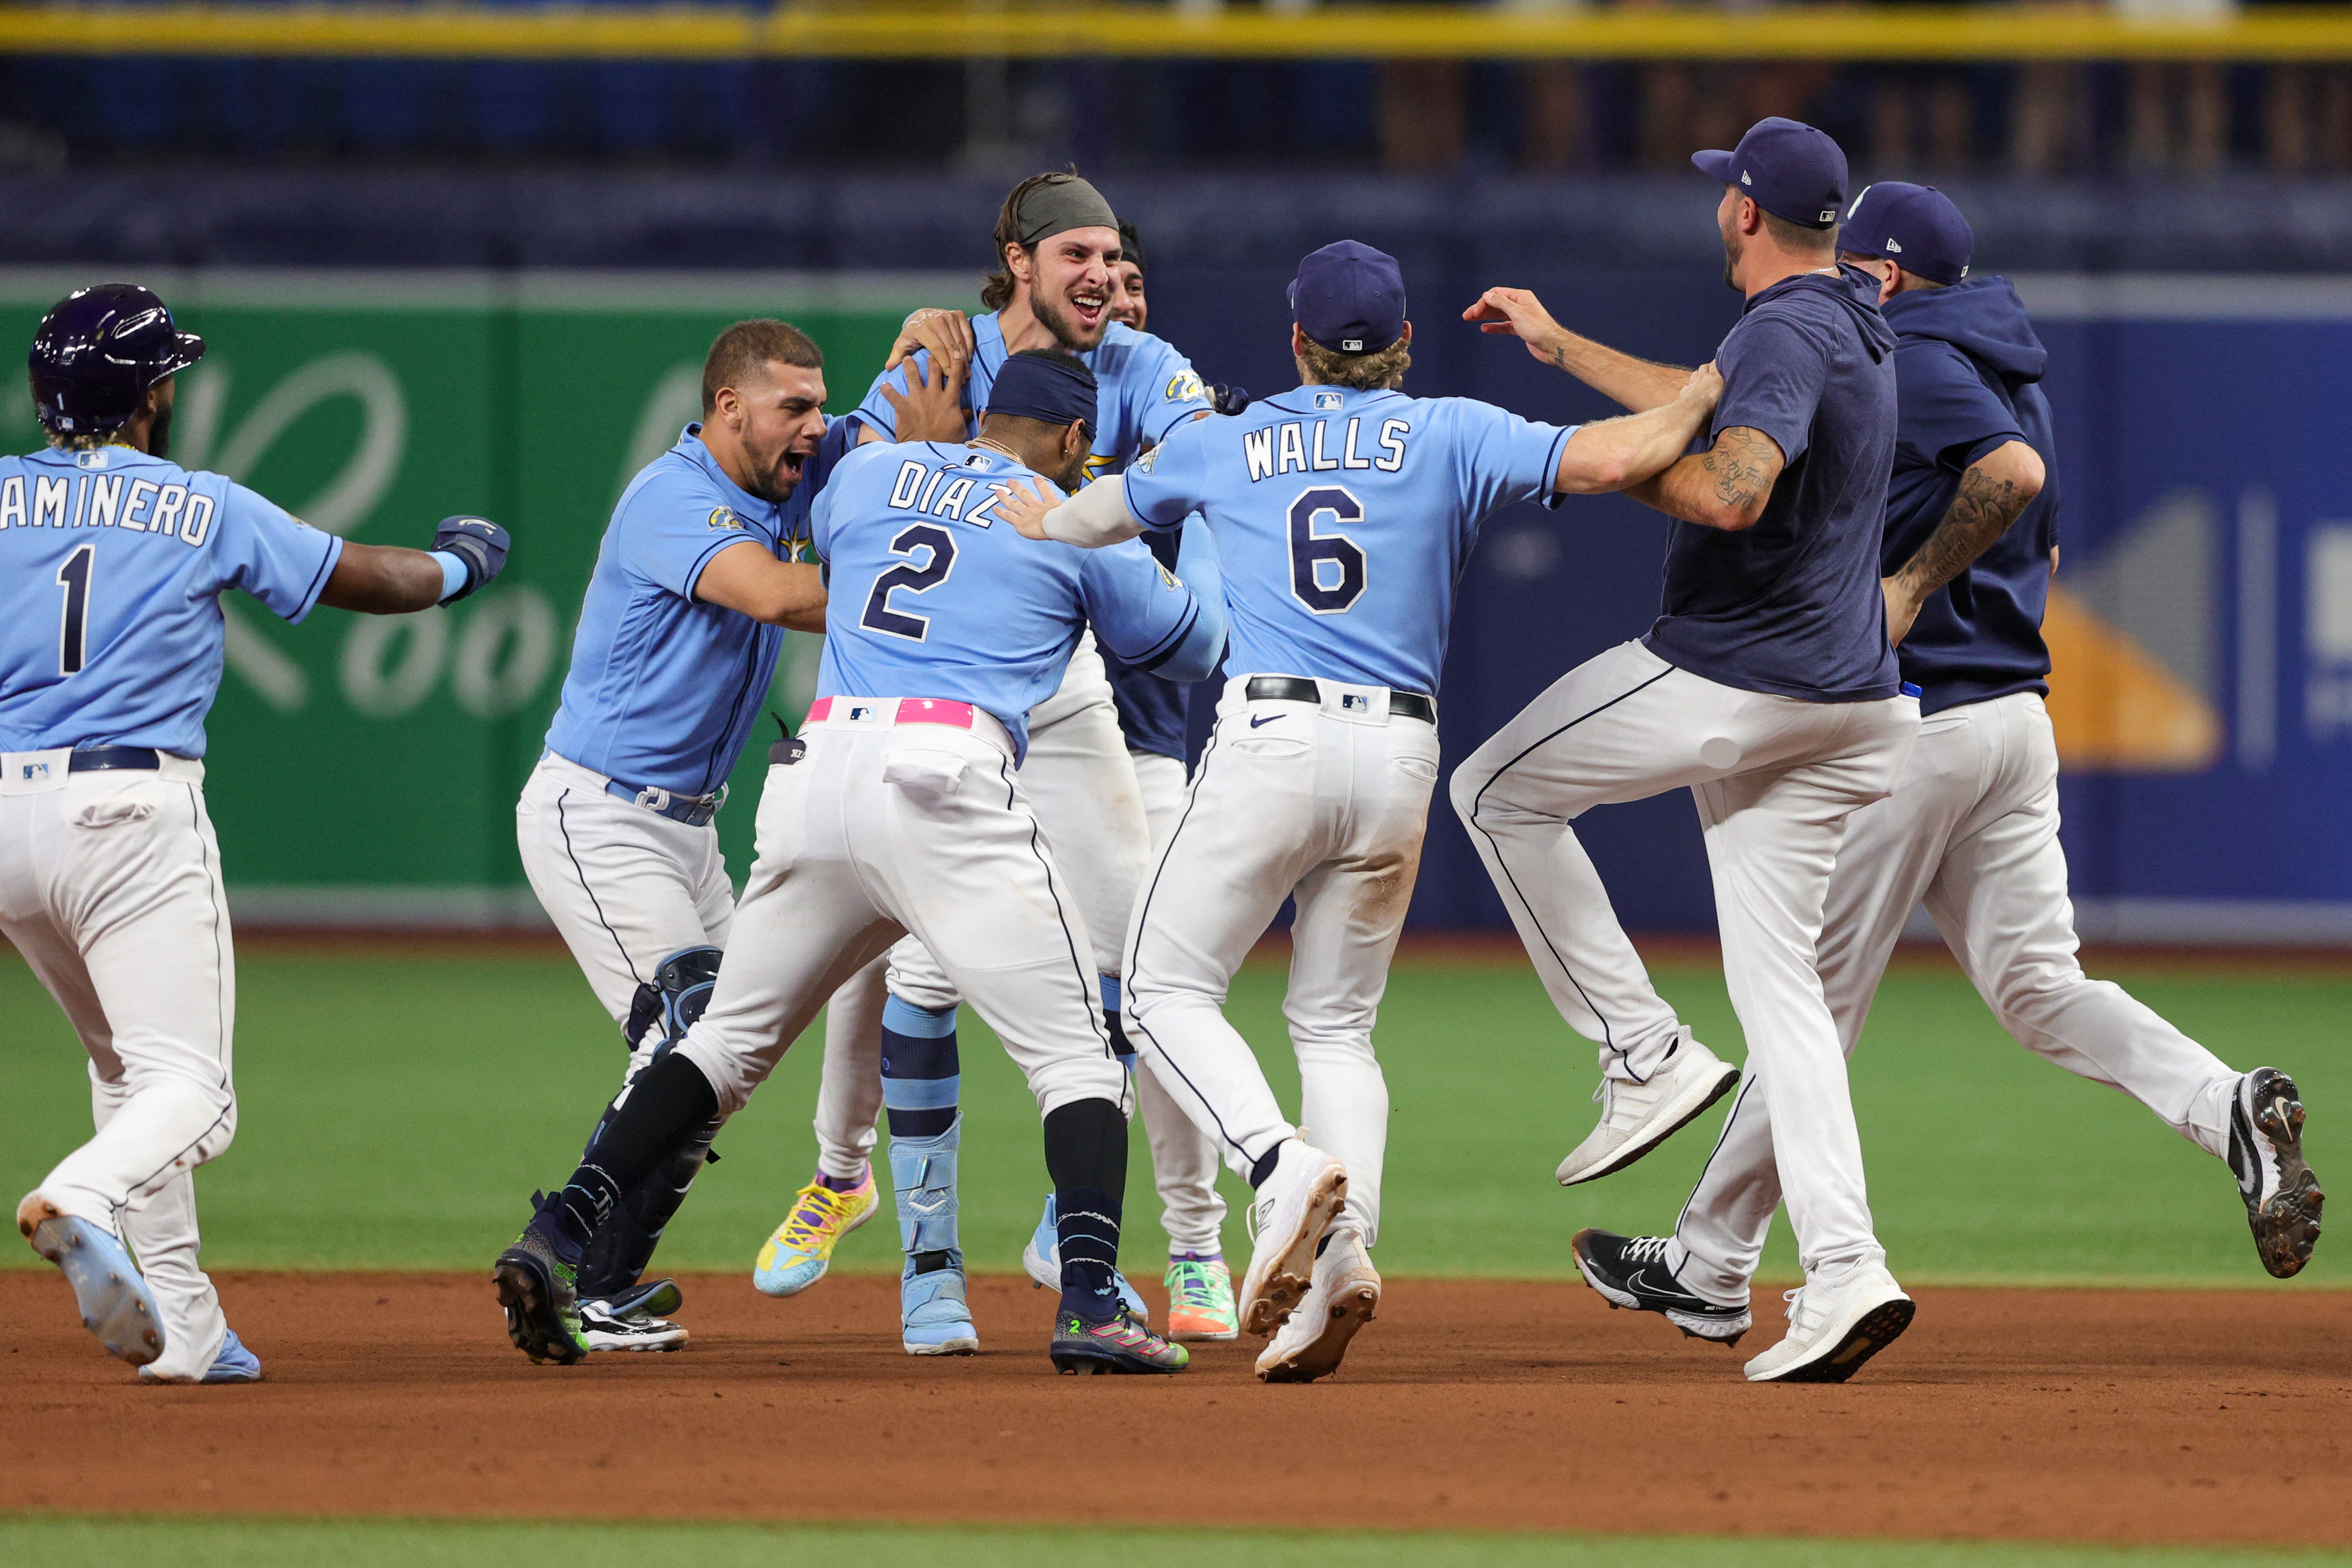 Sports Road Trips: Tampa Bay Rays 3 at Toronto Blue Jays 6